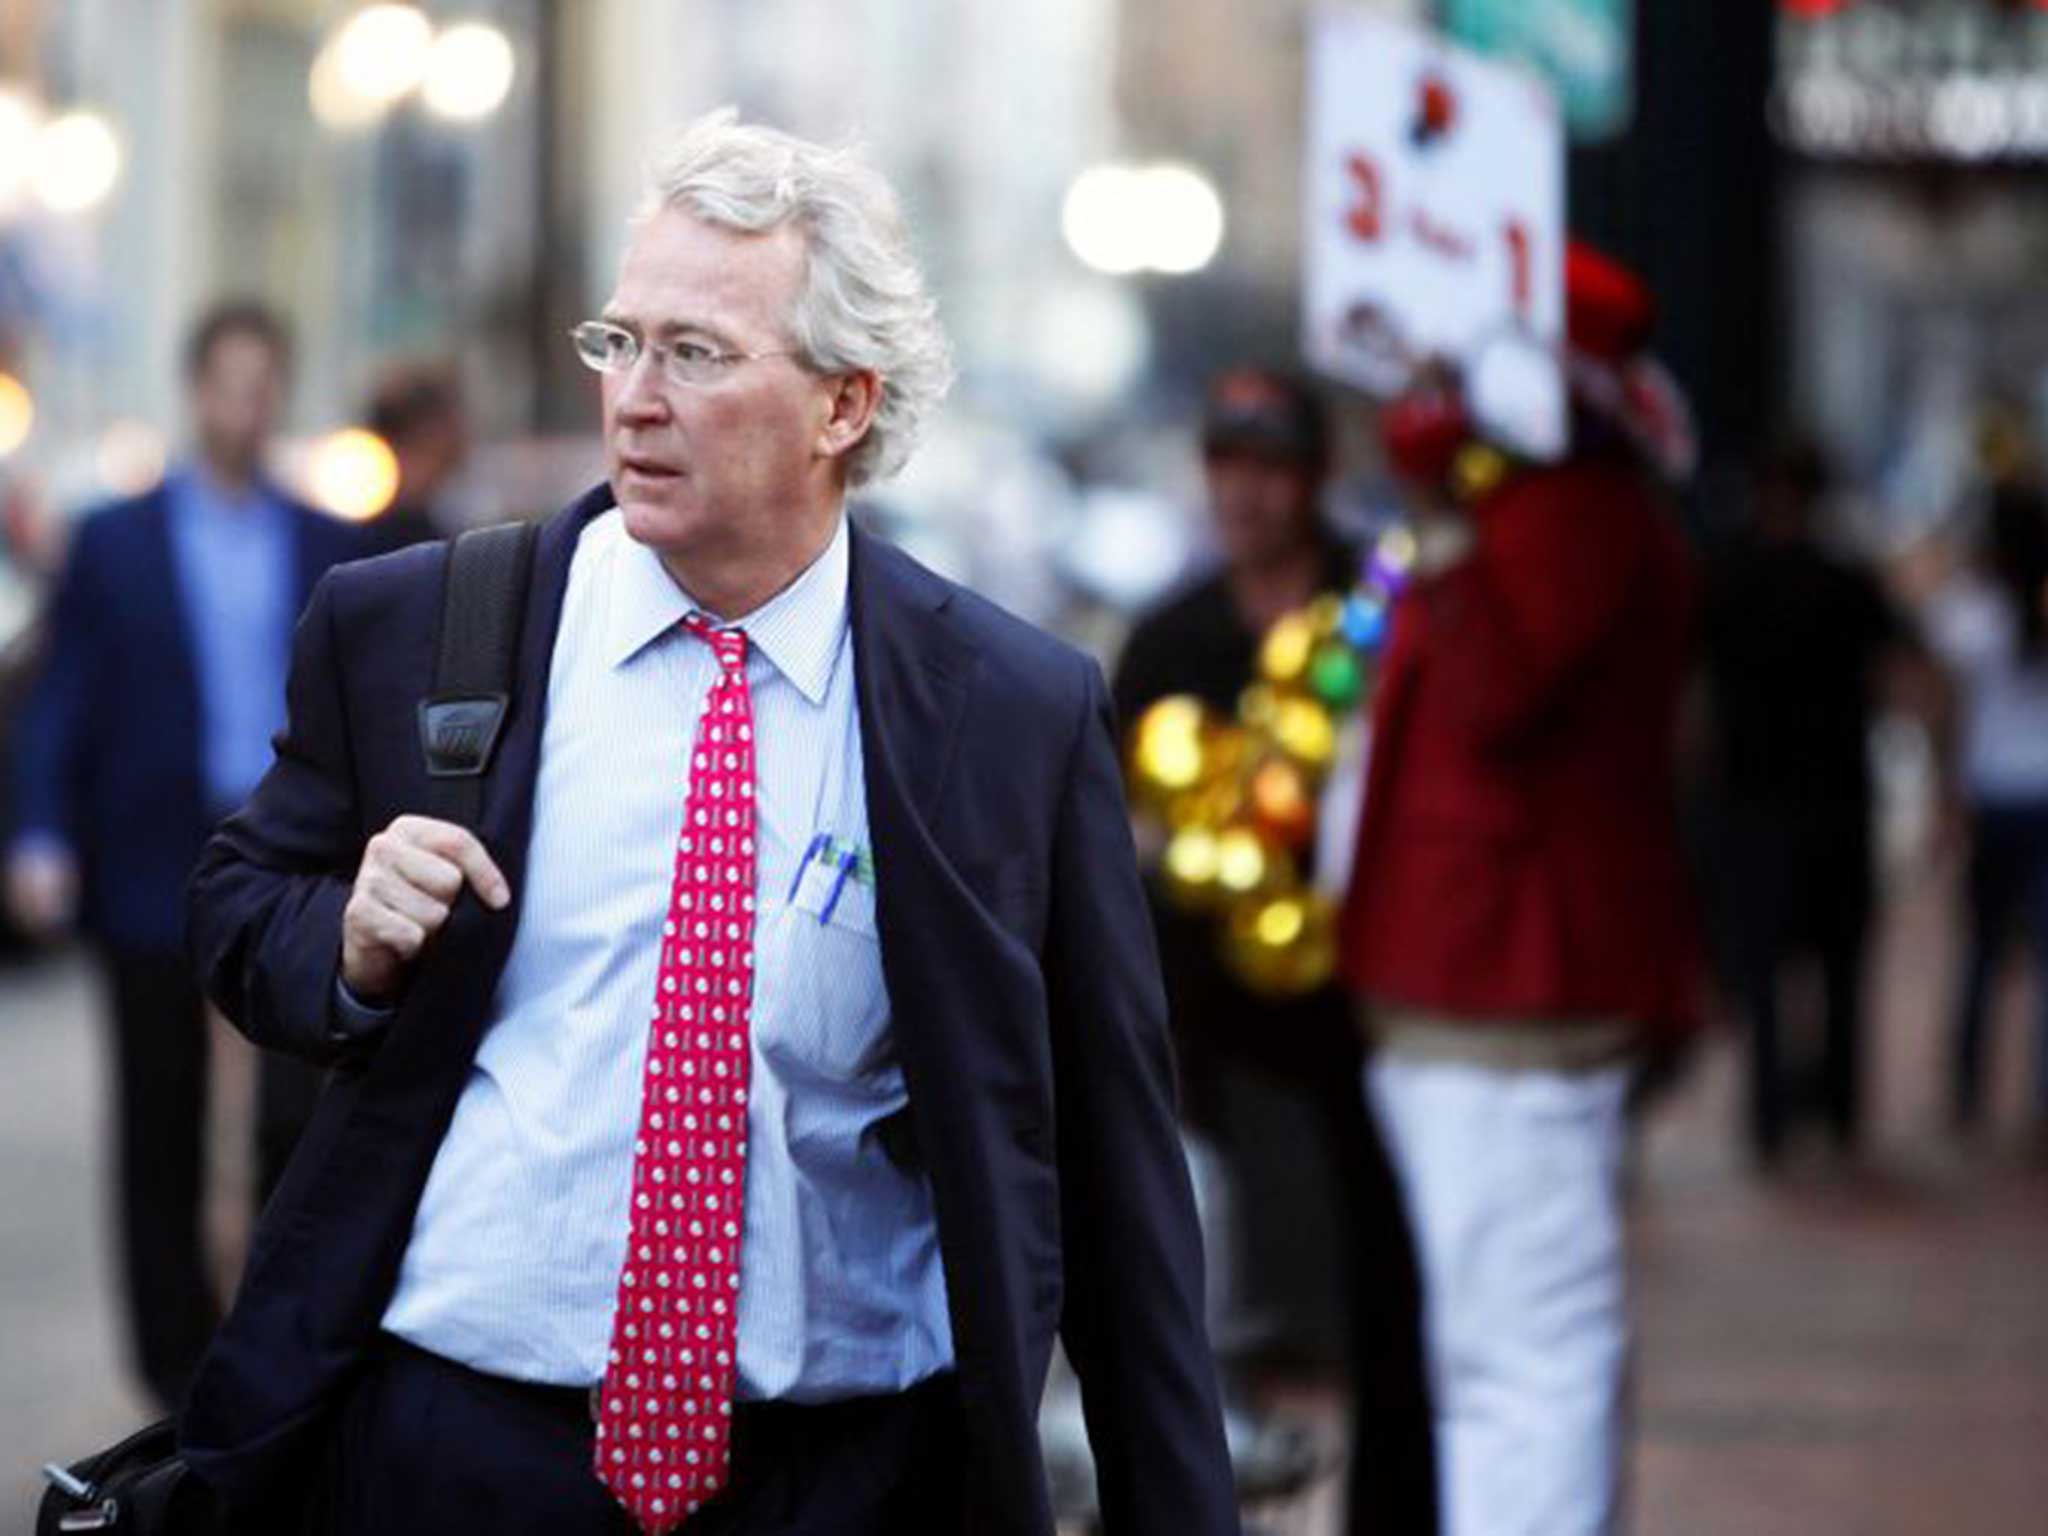 Aubrey McClendon: Chief Executive Officer, Chairman, and Co-founder of Chesapeake Energy Corporation